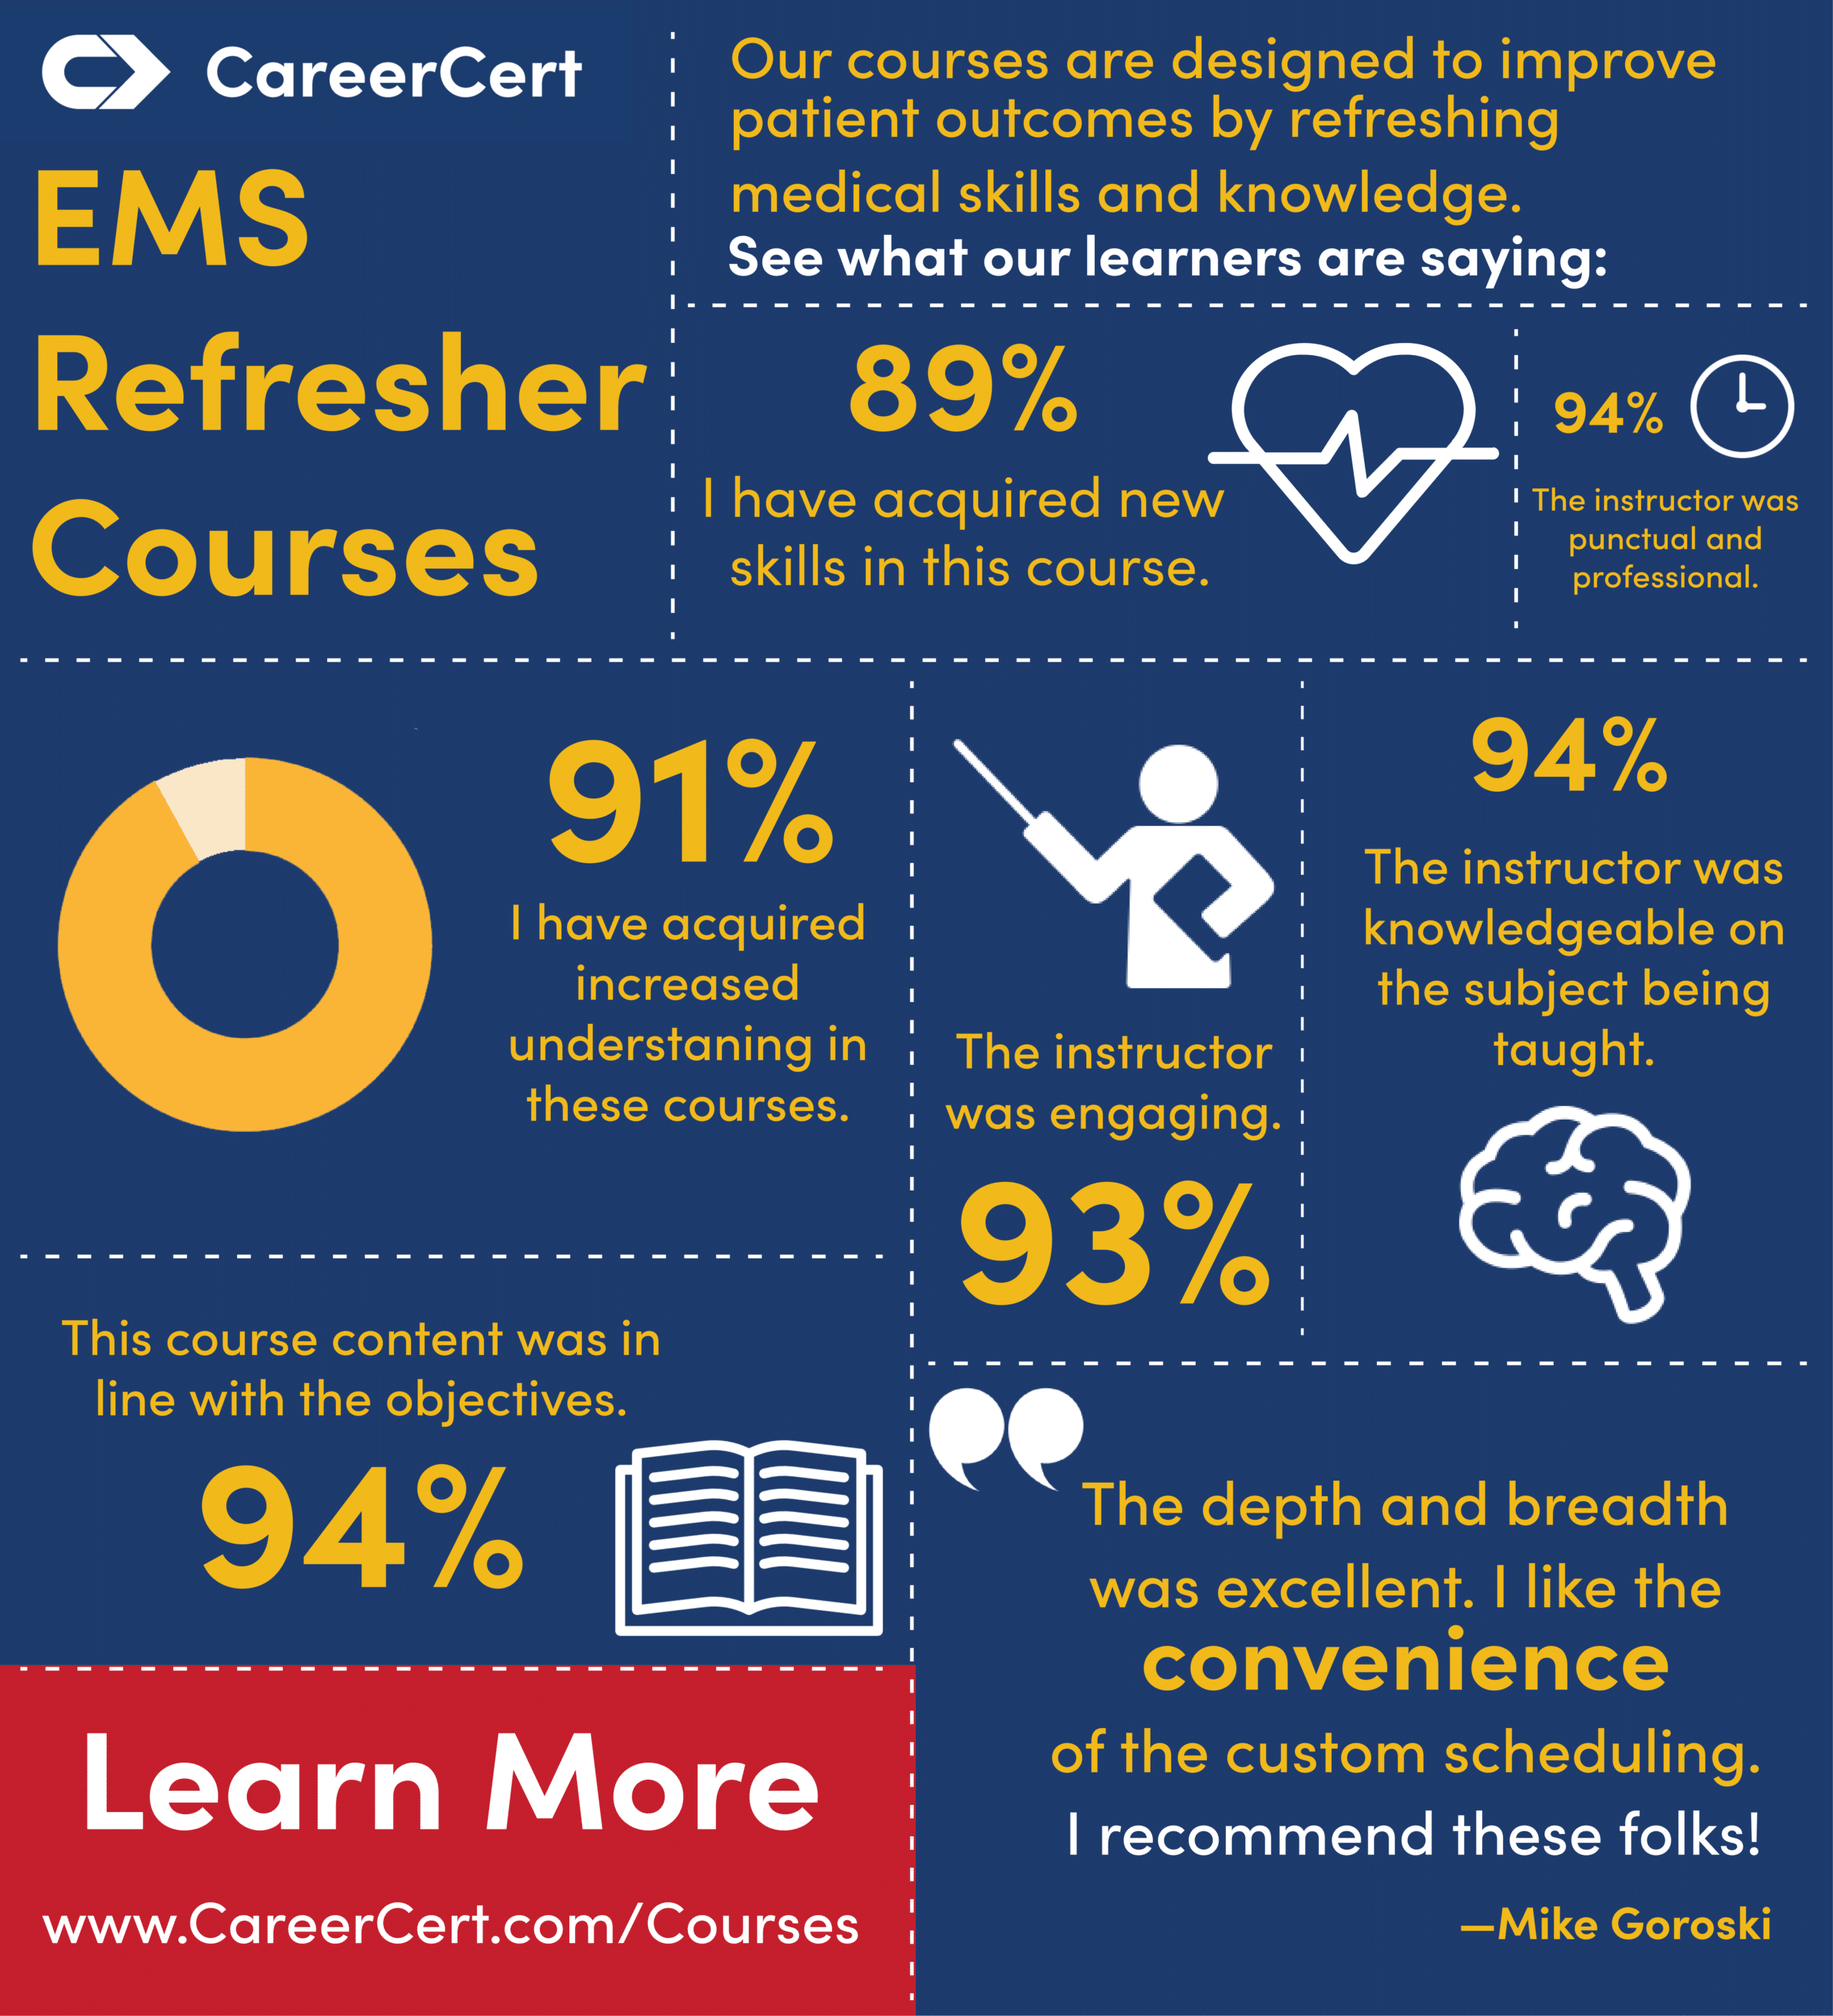 See what our learners are saying about our online paramedic refreshers, EMT-basic recertifications, and AEMT online education